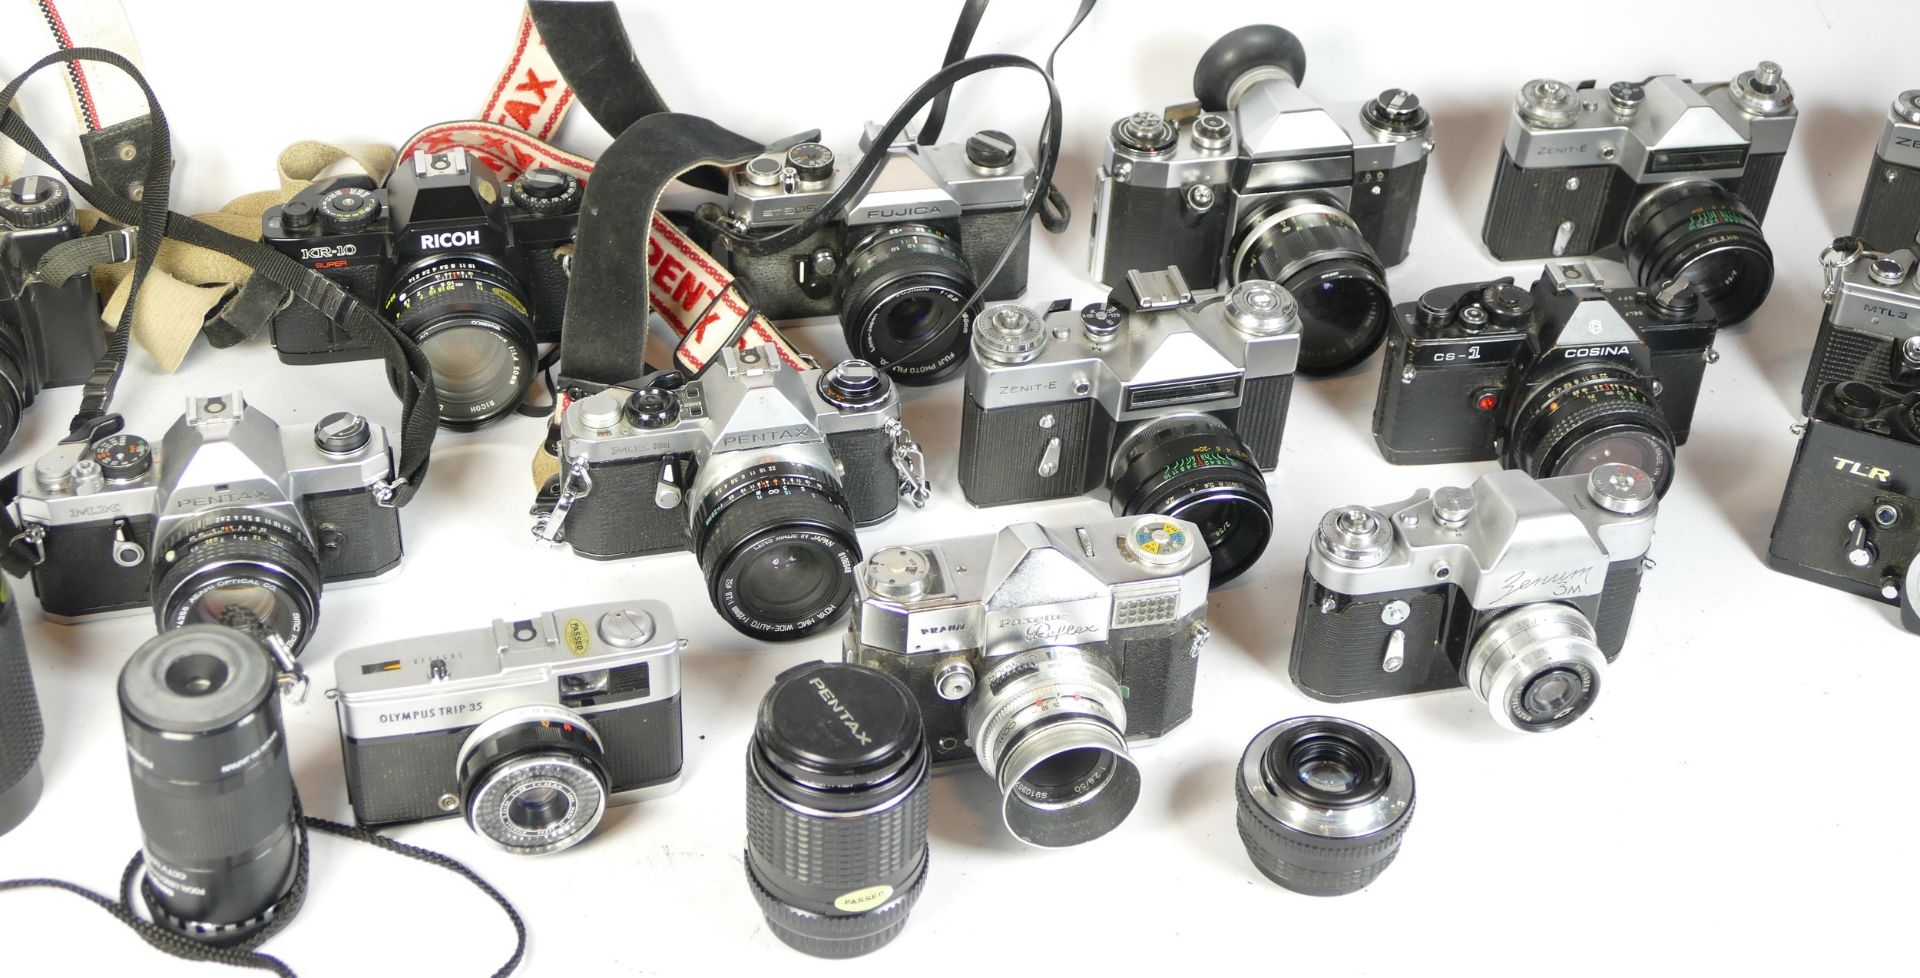 Fifteen SLR vintage film cameras to include a Cosina CS-1, a Pentax ME, a Petri TLR and a Zenit 122. - Image 2 of 3